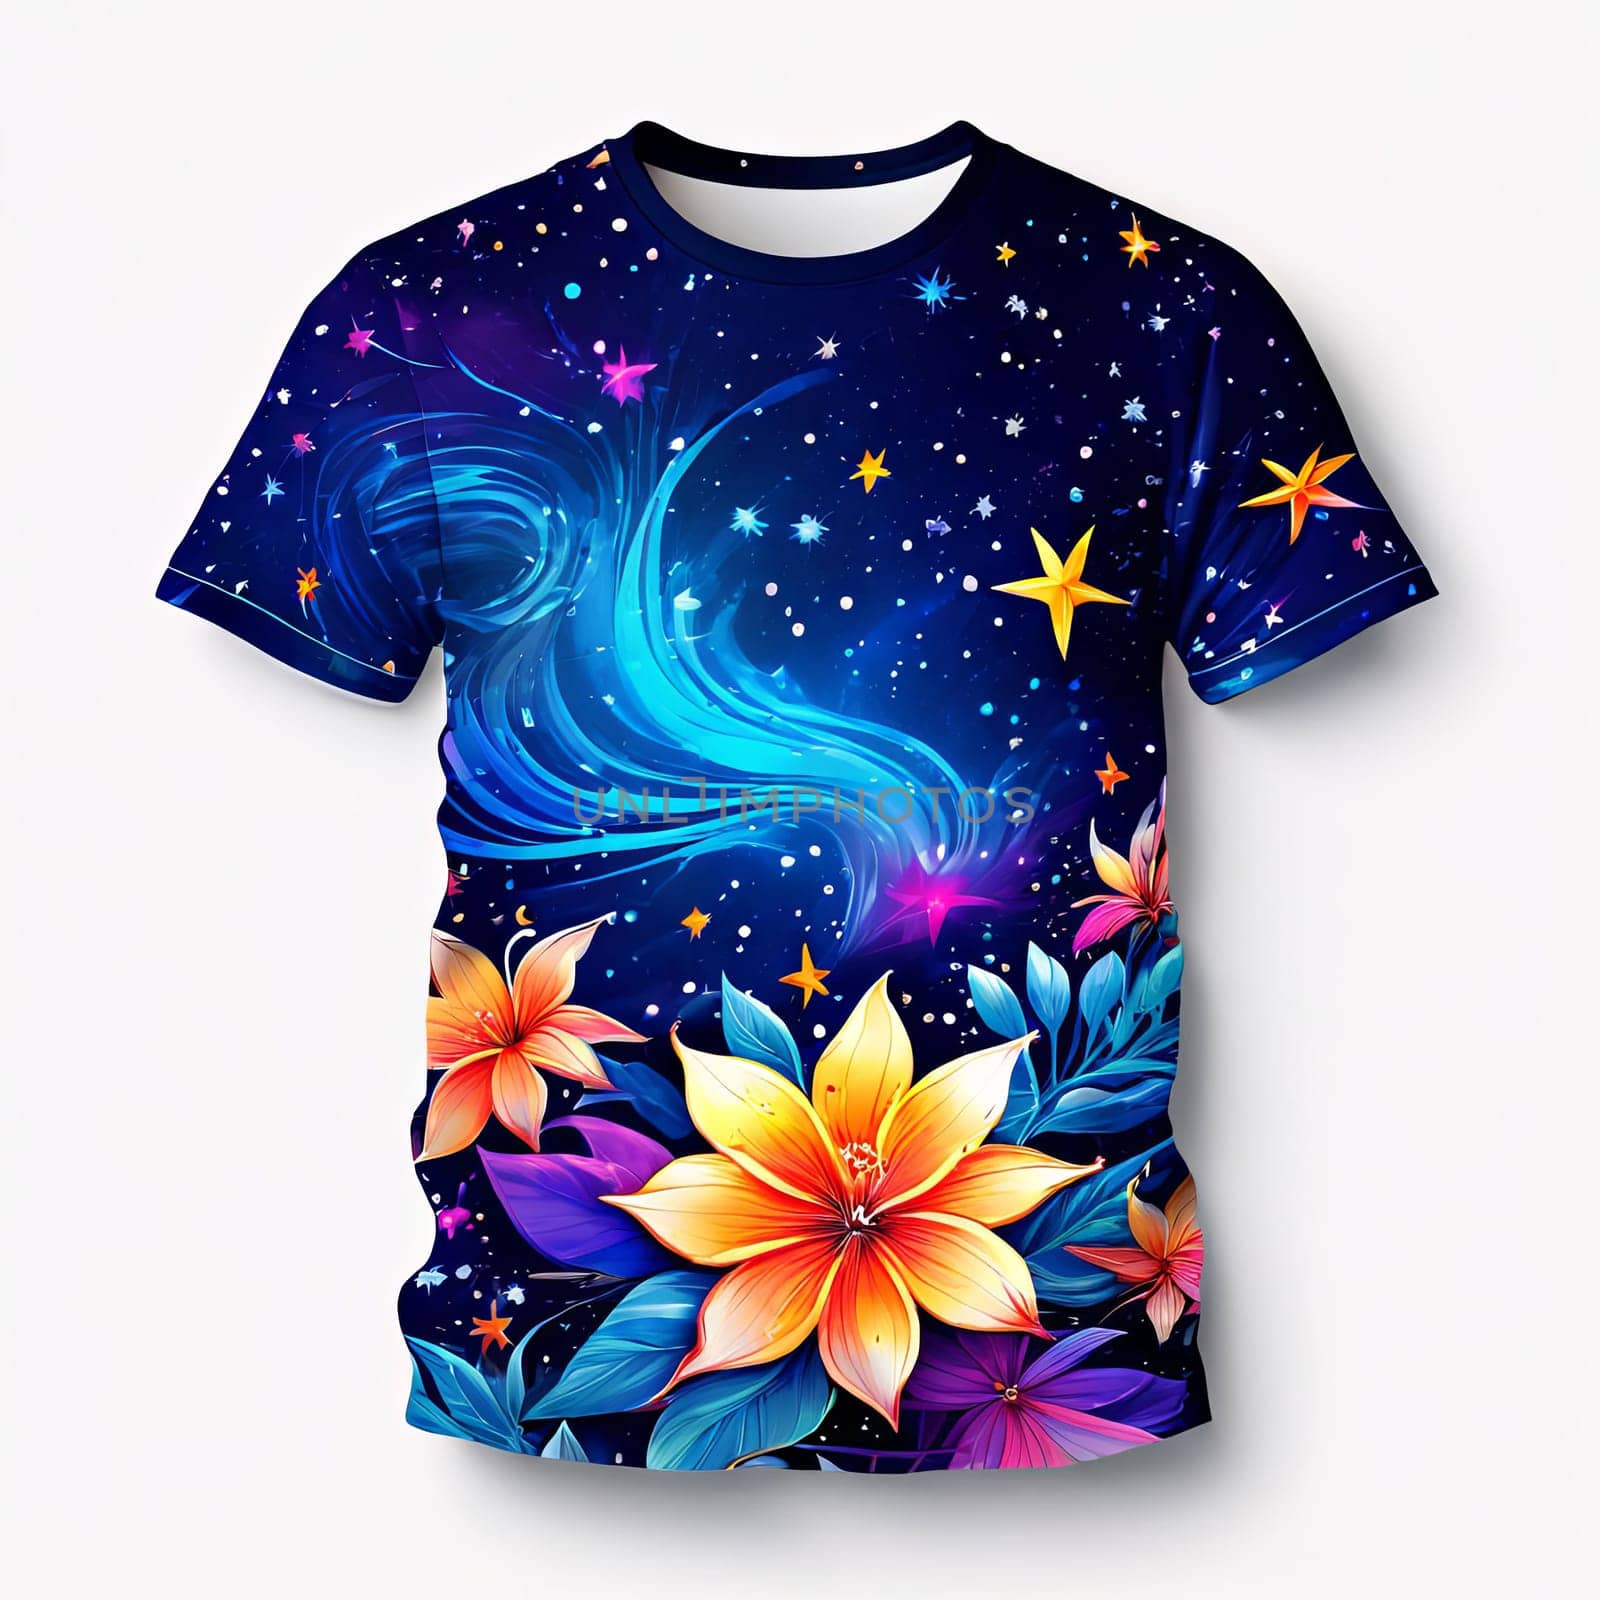 lotus flowers set against serene night sky filled with sparkling stars, creating peaceful, enchanting scene that symbolizes purity, enlightenment, tranquility. For website design, print. by Angelsmoon